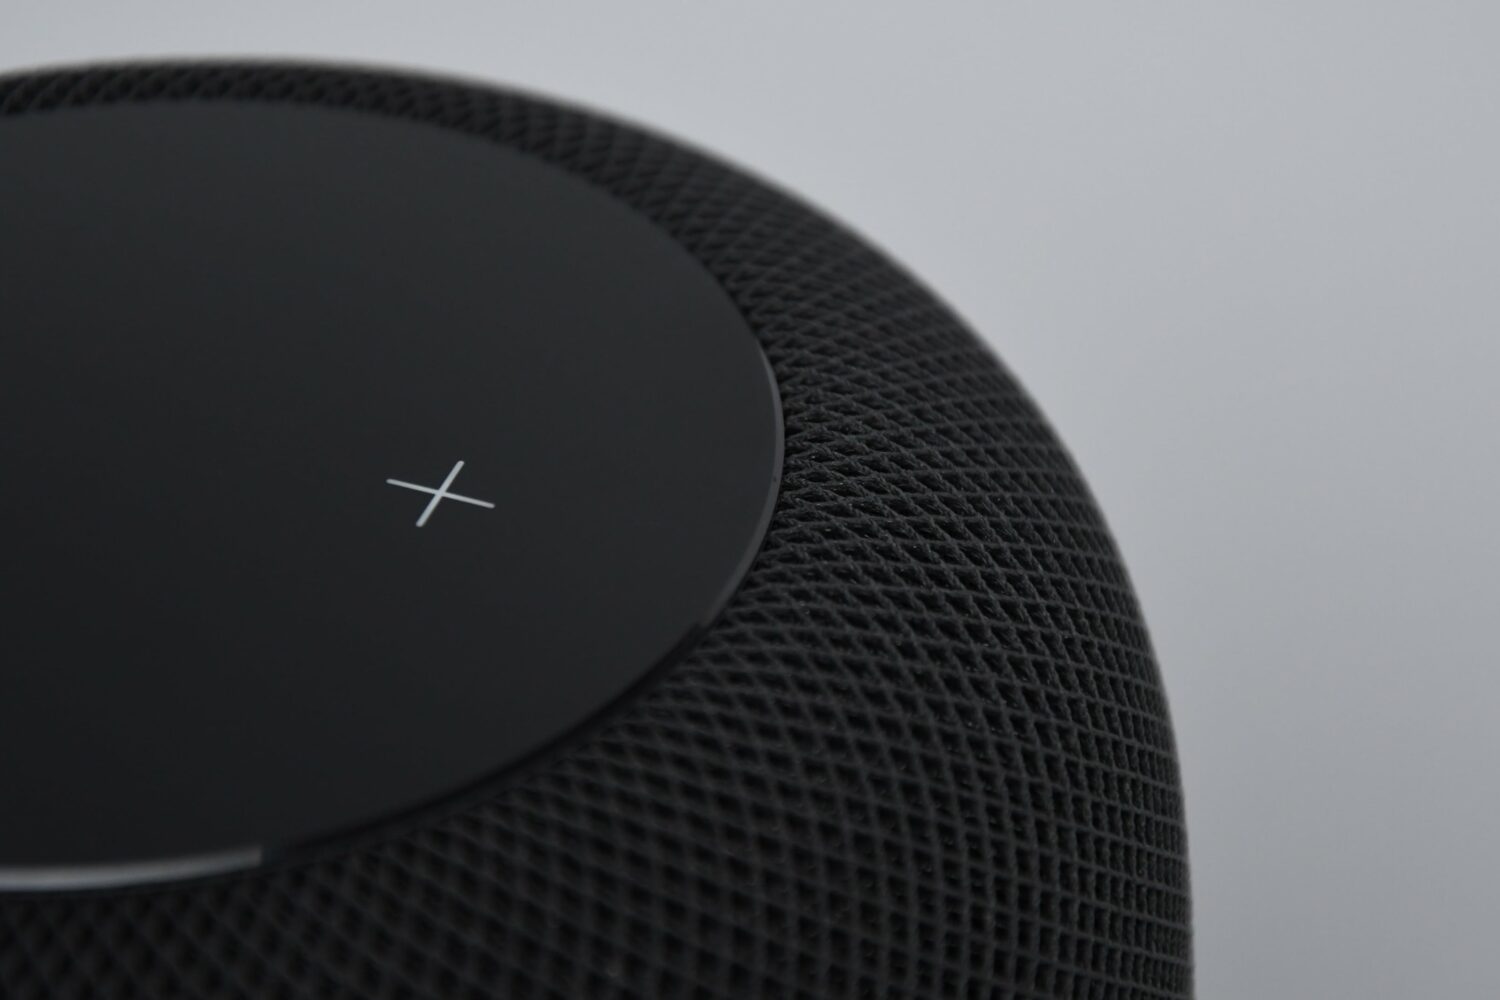 Closeup showing the volume up button on the touch surface of a black HomePod smart speaker